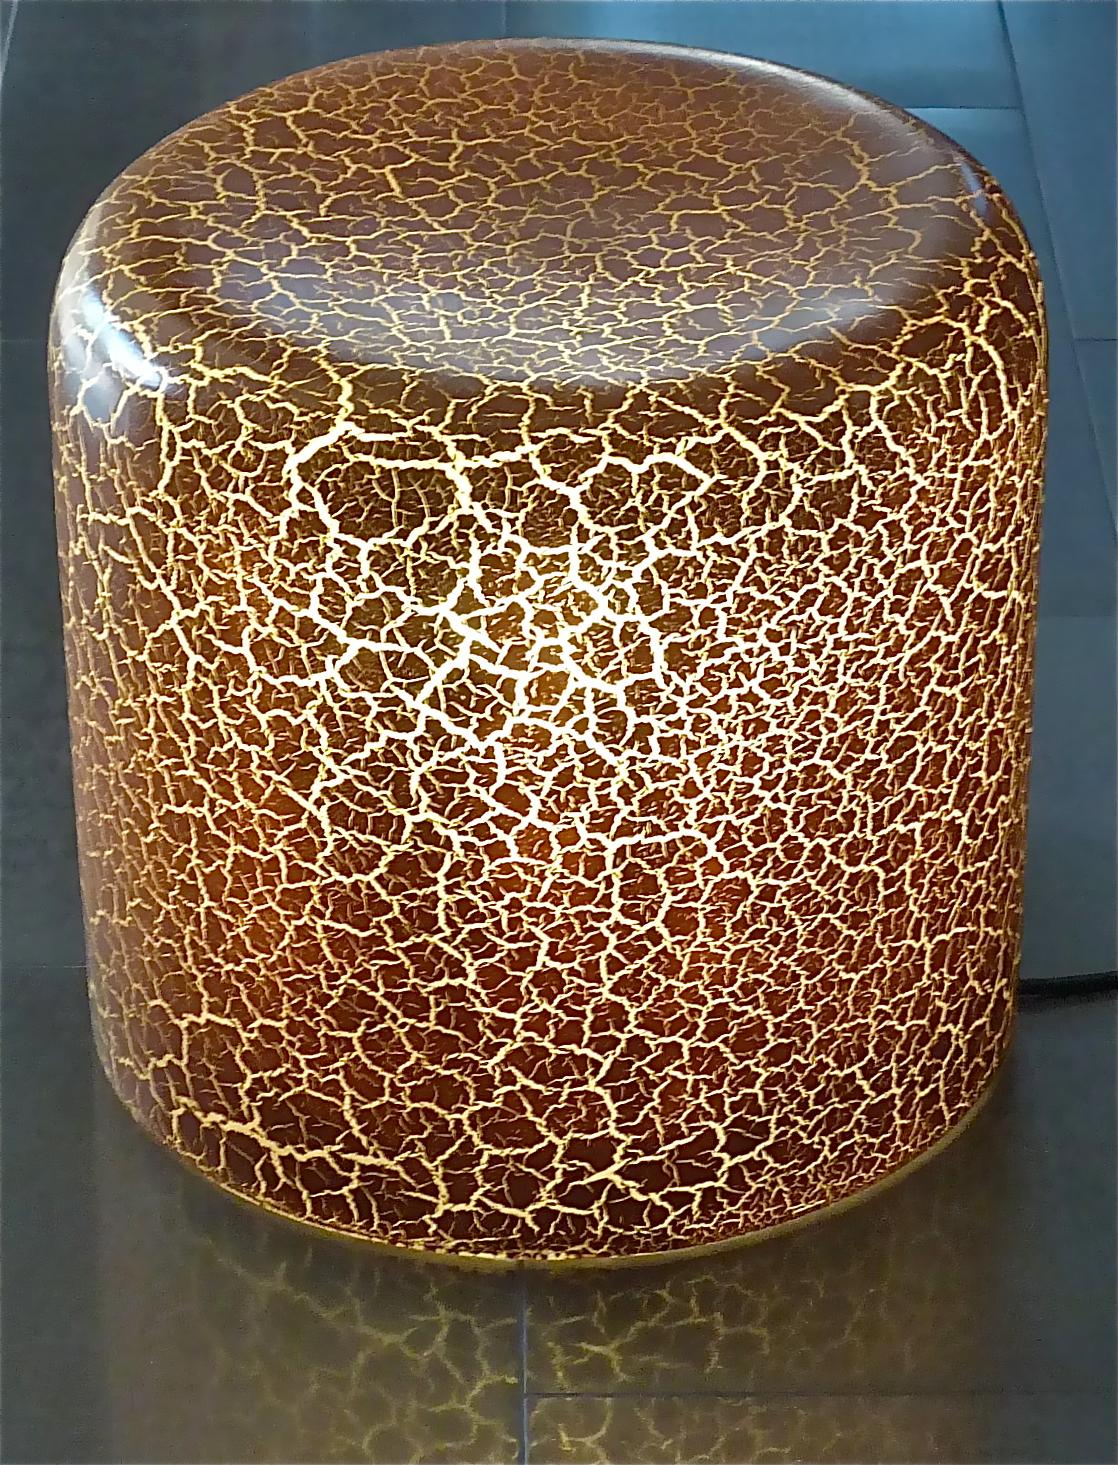 French Unique Sculptural Illuminated Resin Plastic Stool Lamp Object 1960s 70s Panton